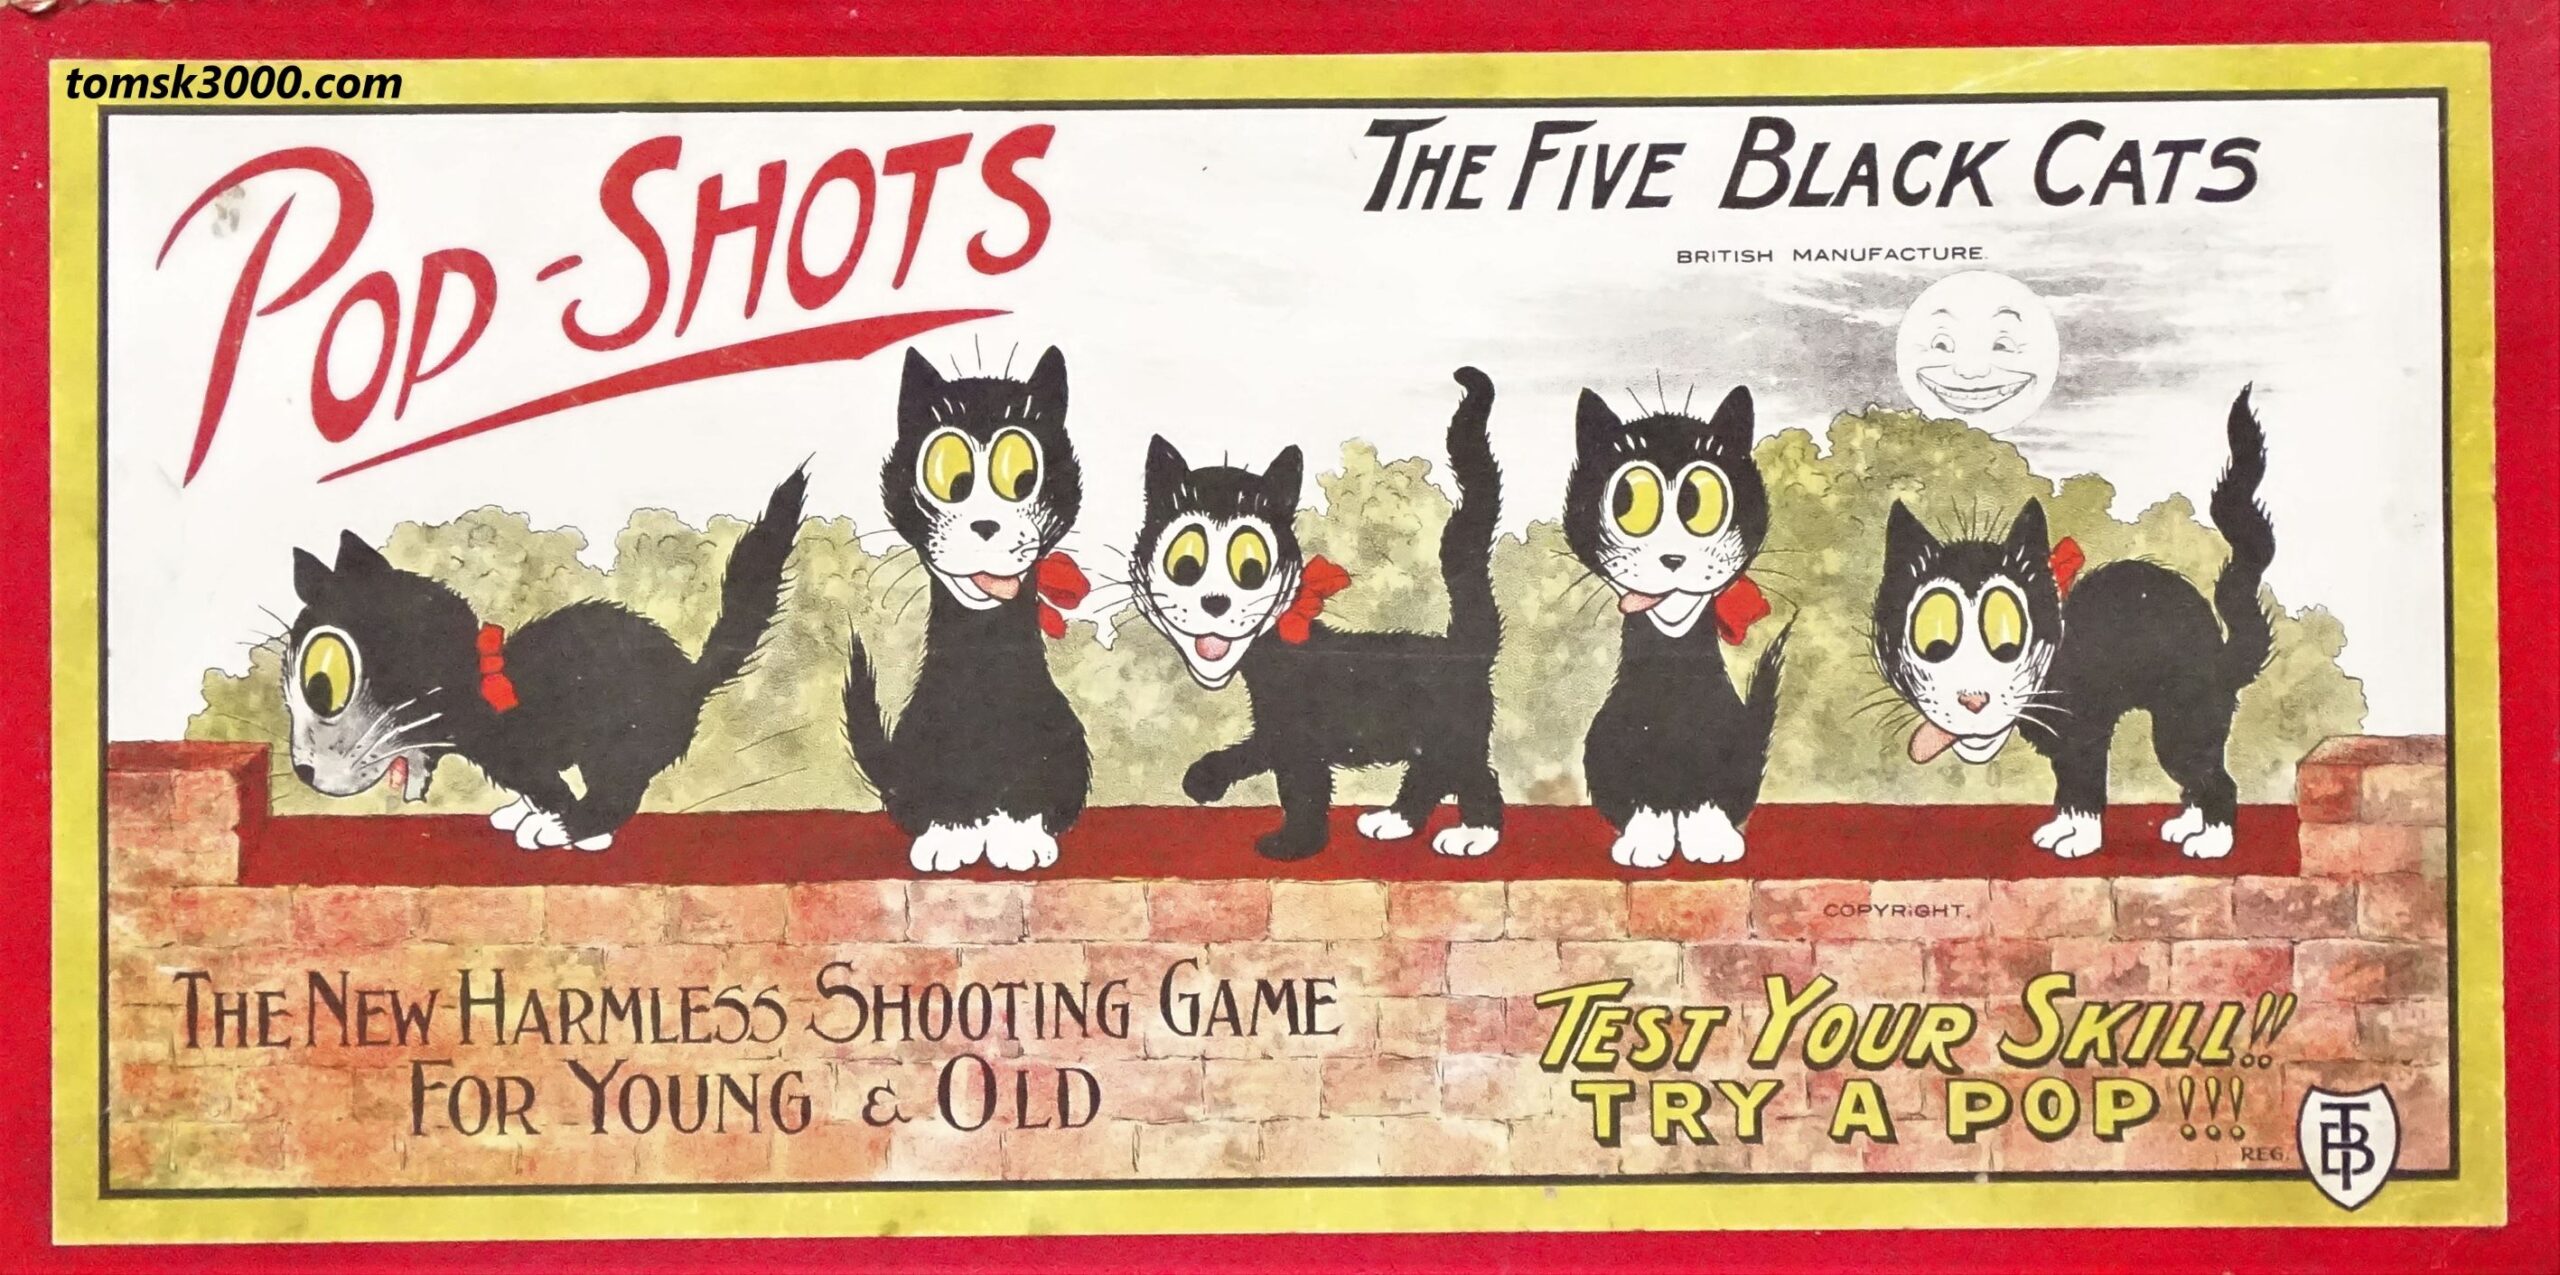 1930s Pop-Shots The Five Black Cats Shooting Game, England